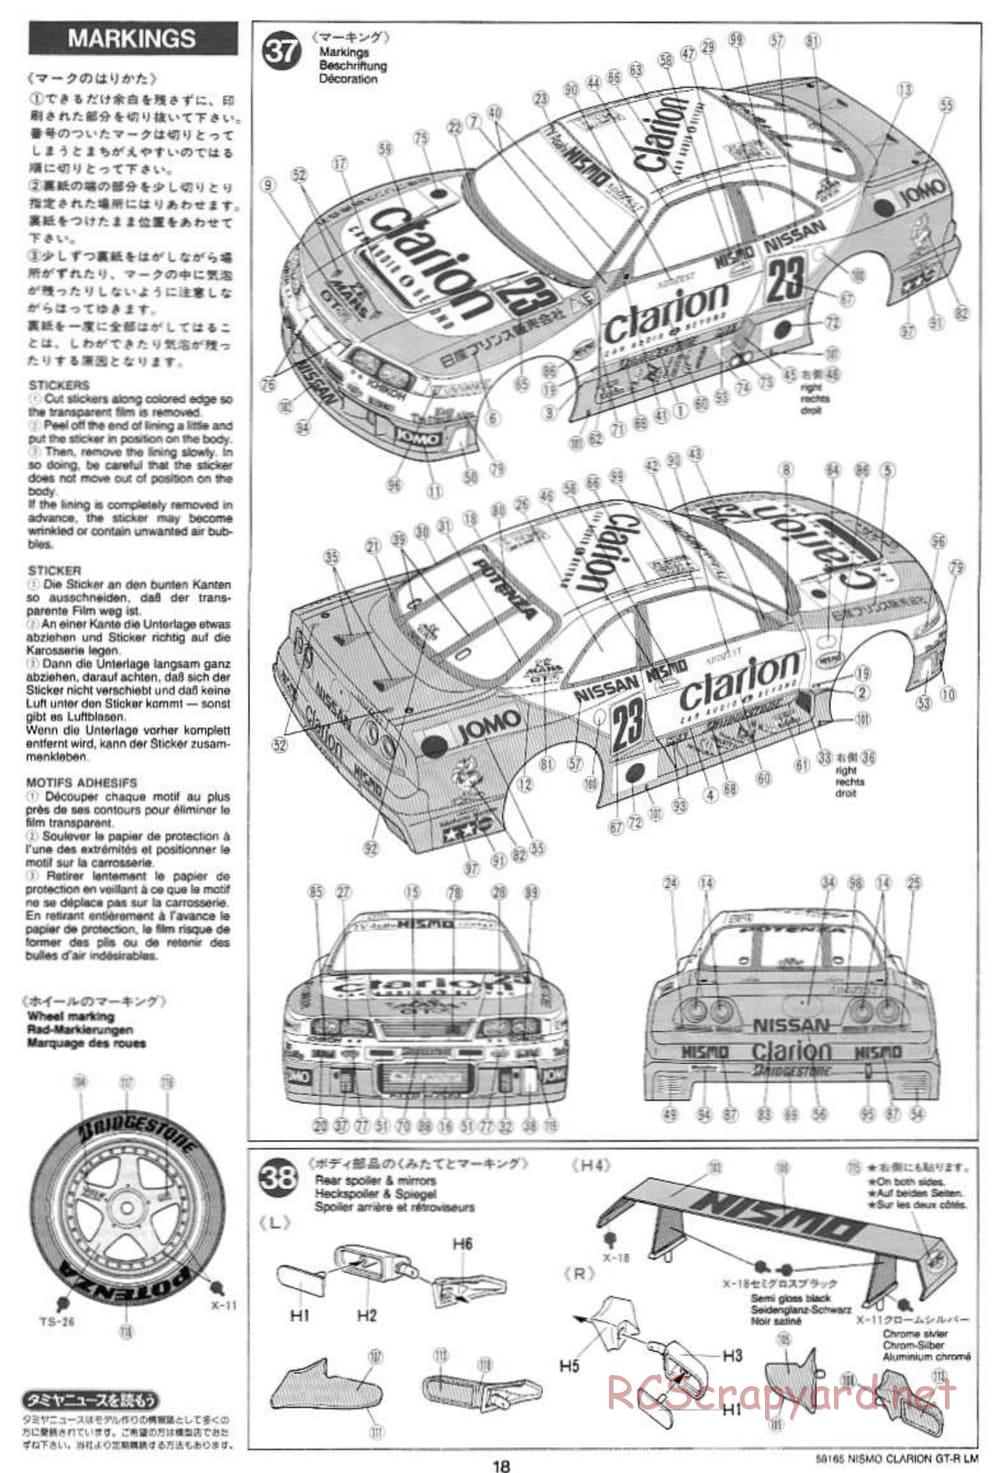 Tamiya - Nismo Clarion GT-R LM - TA-02W Chassis - Manual - Page 18